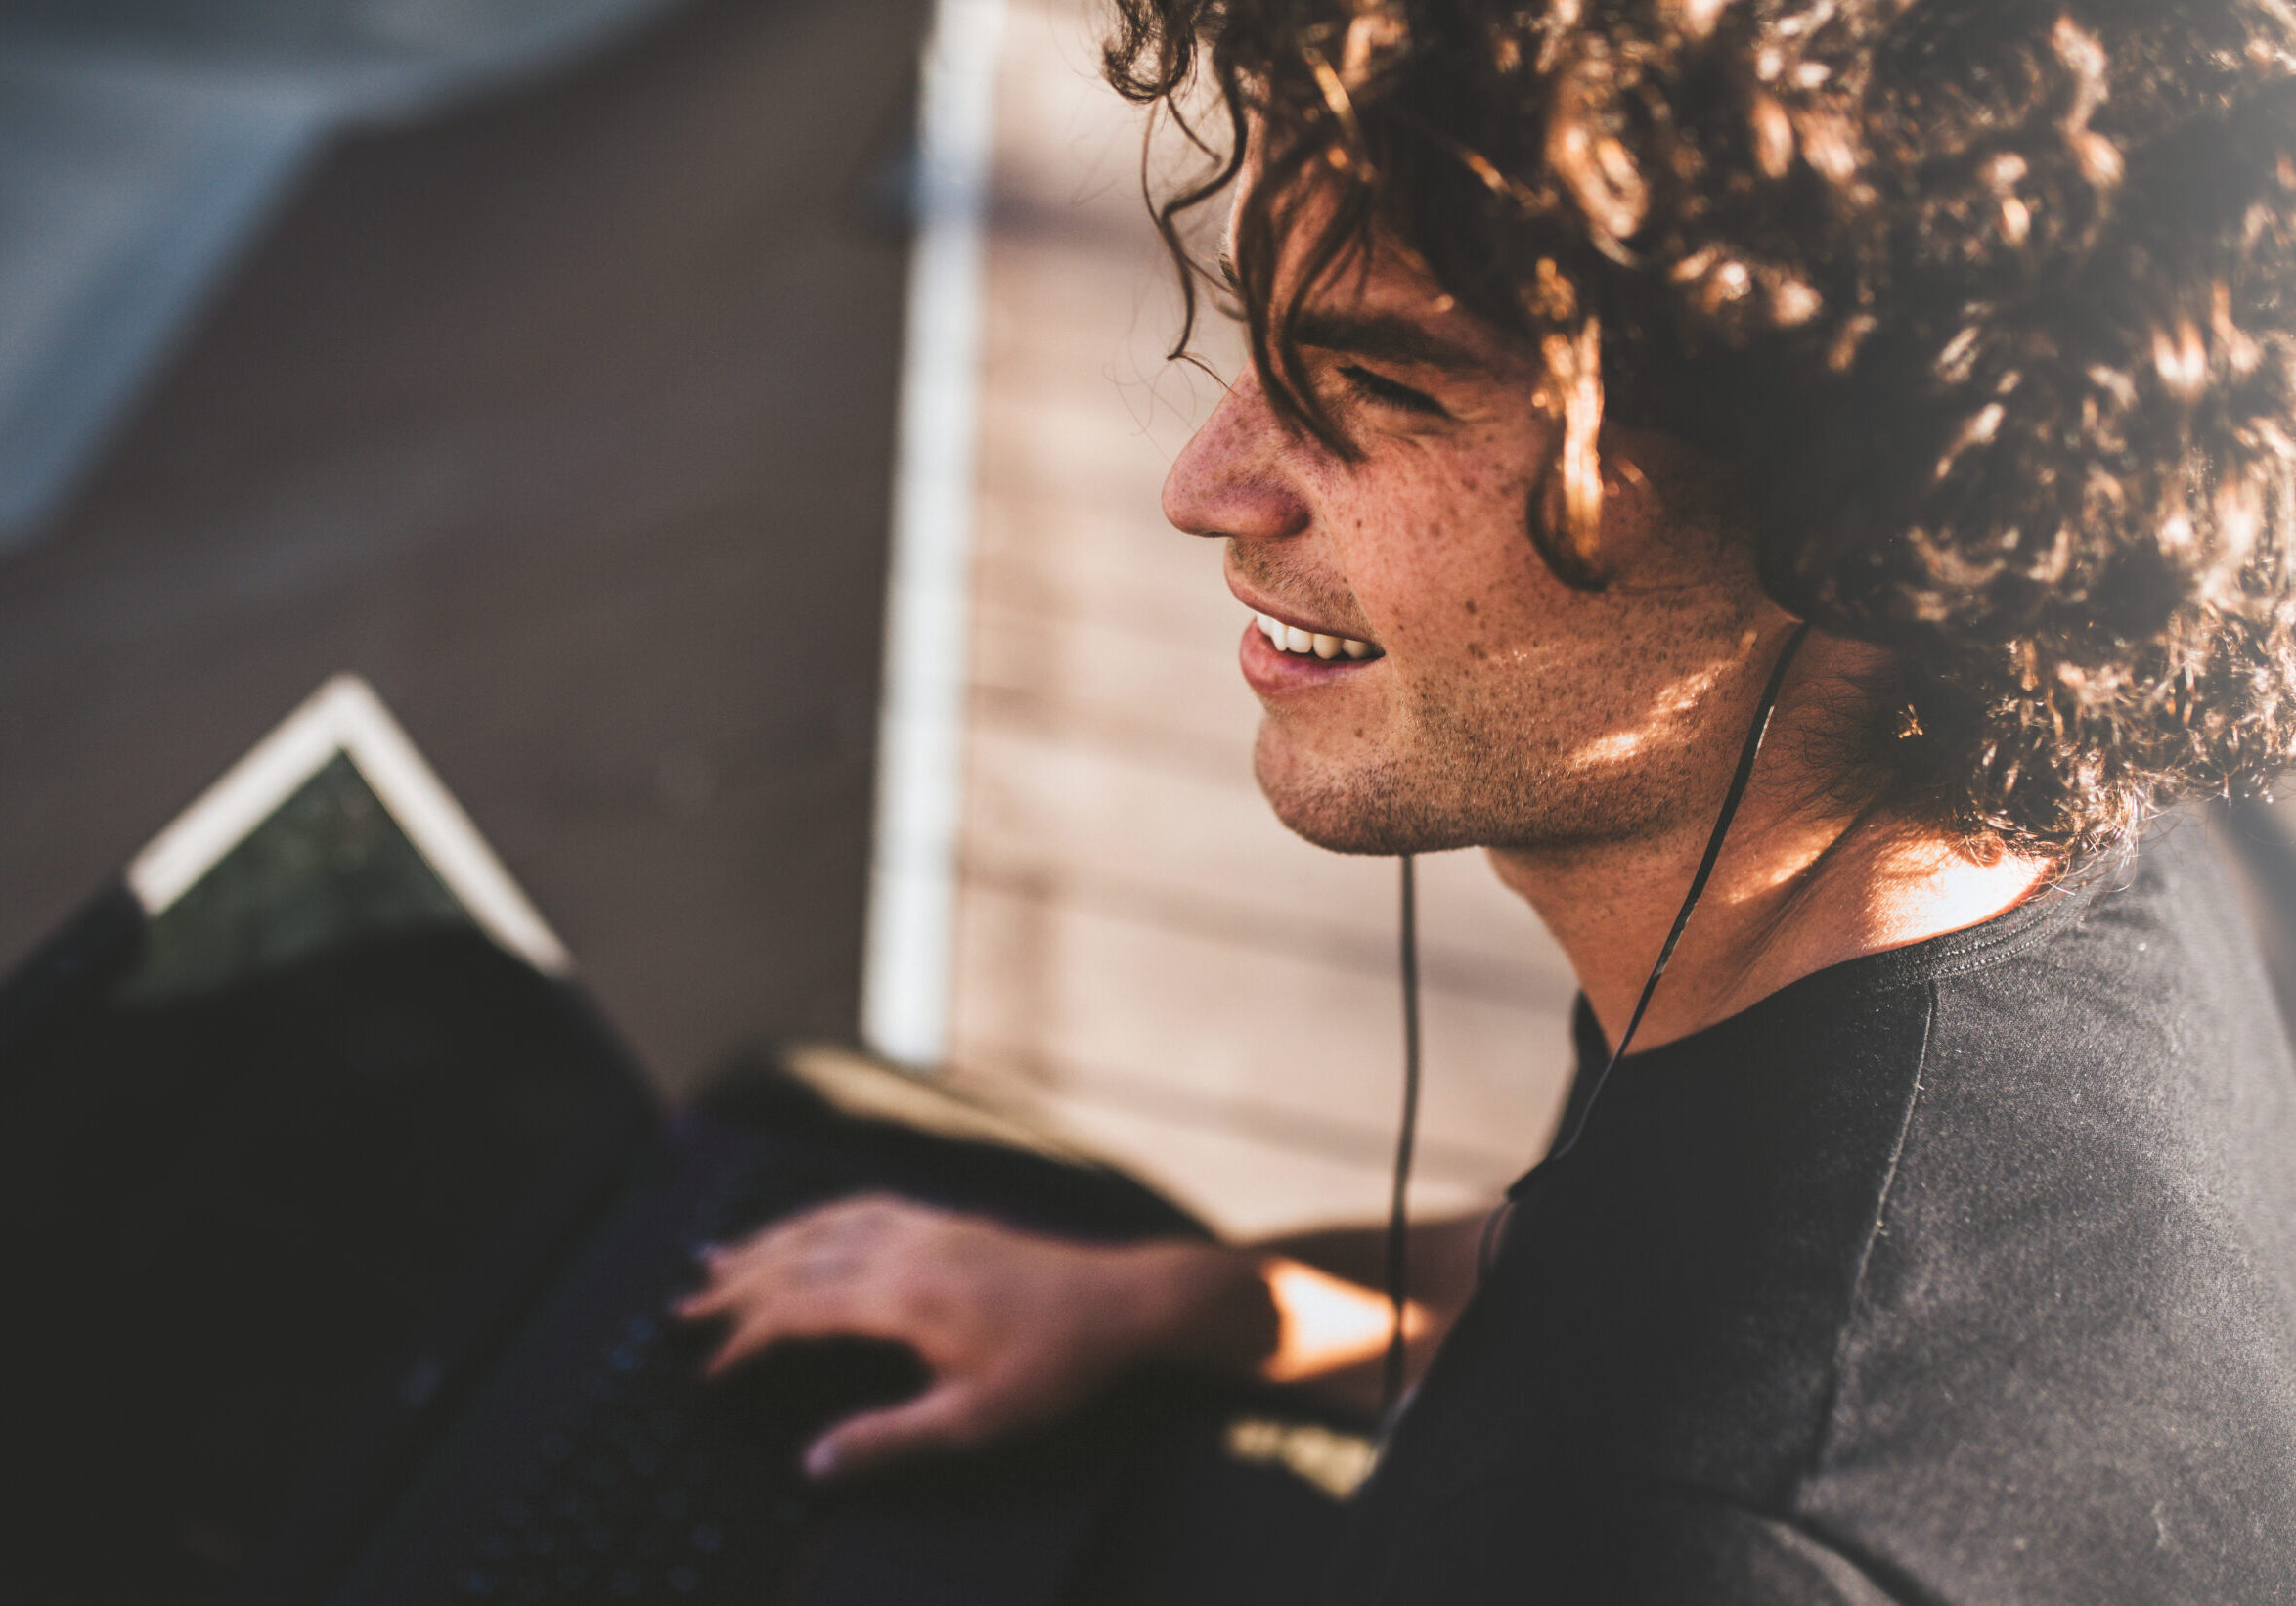 Closeup rear view shot of smiling male with curly hair using laptop for chatting online with friends and earphones to listening the music, connected to free wireless. Handsome man texting messages.